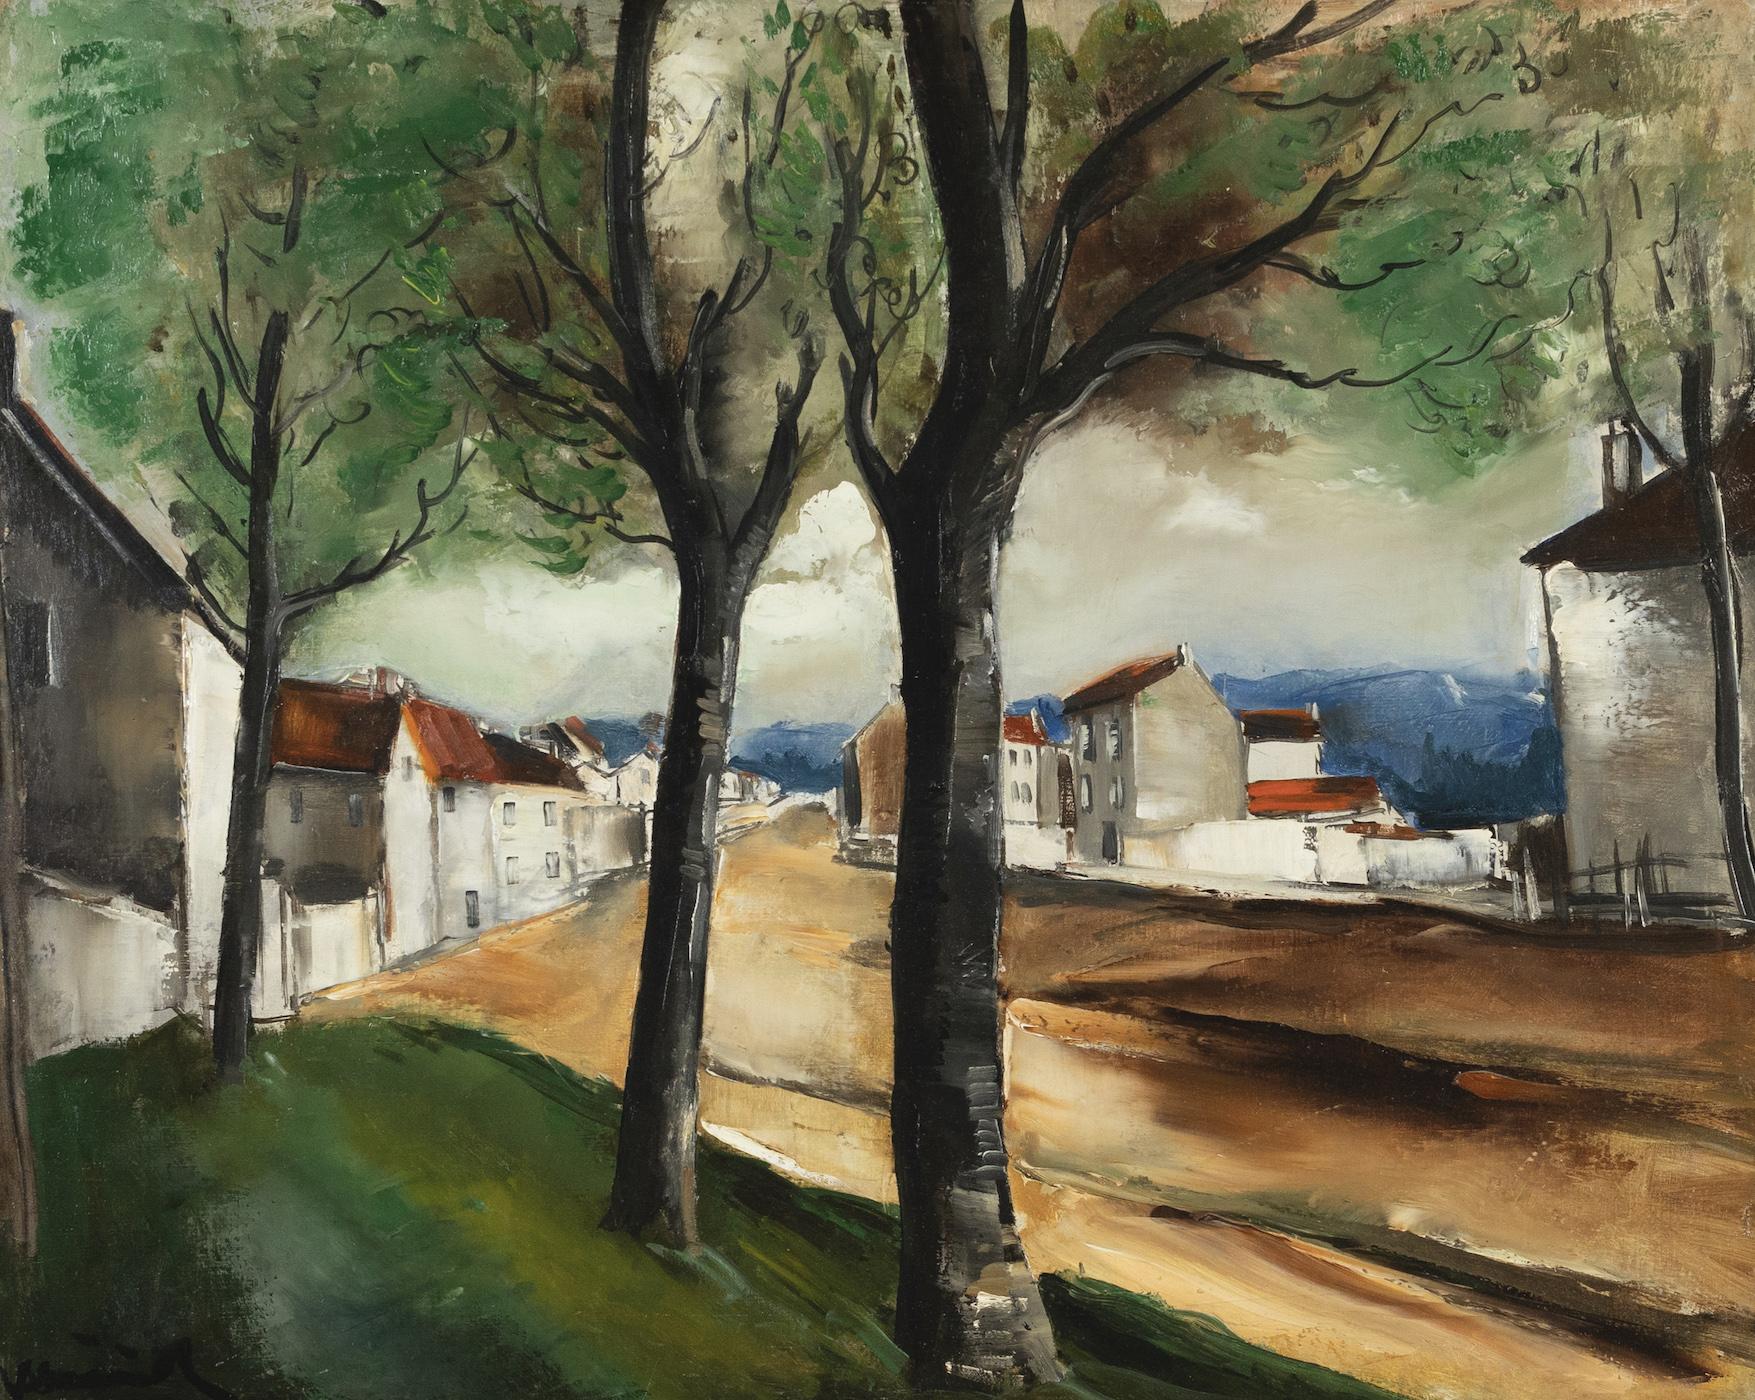 *PLEASE NOTE UK BUYERS WILL ONLY PAY 5% VAT ON THIS PURCHASE.

La Route by Maurice de Vlaminck (1876-1958)
Oil on canvas
64.8 x 81 cm (25 ¹/₂ x 31 ⁷/₈ inches)
Signed lower left, Vlaminck

This work is accompanied by a letter from the Wildenstein